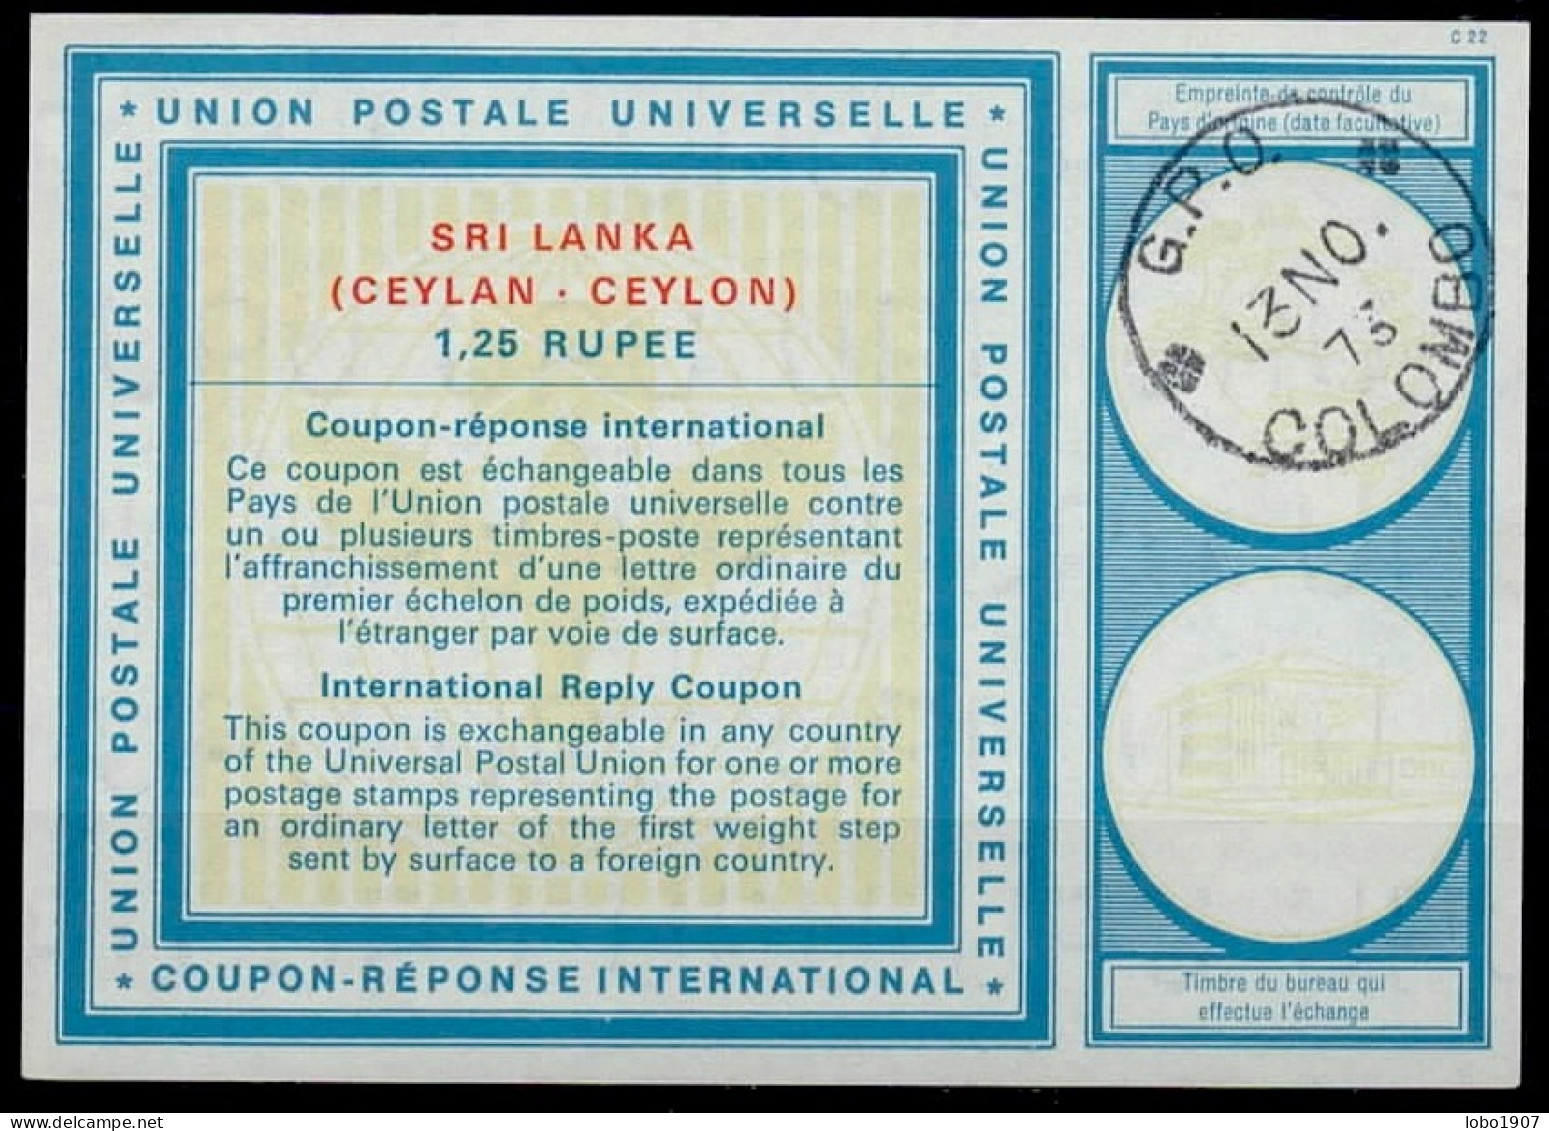 CEYLON SRI LANKA  Collection 12 International Reply Coupon Reponse Cupon Respuesta IRC IAS see list and scans